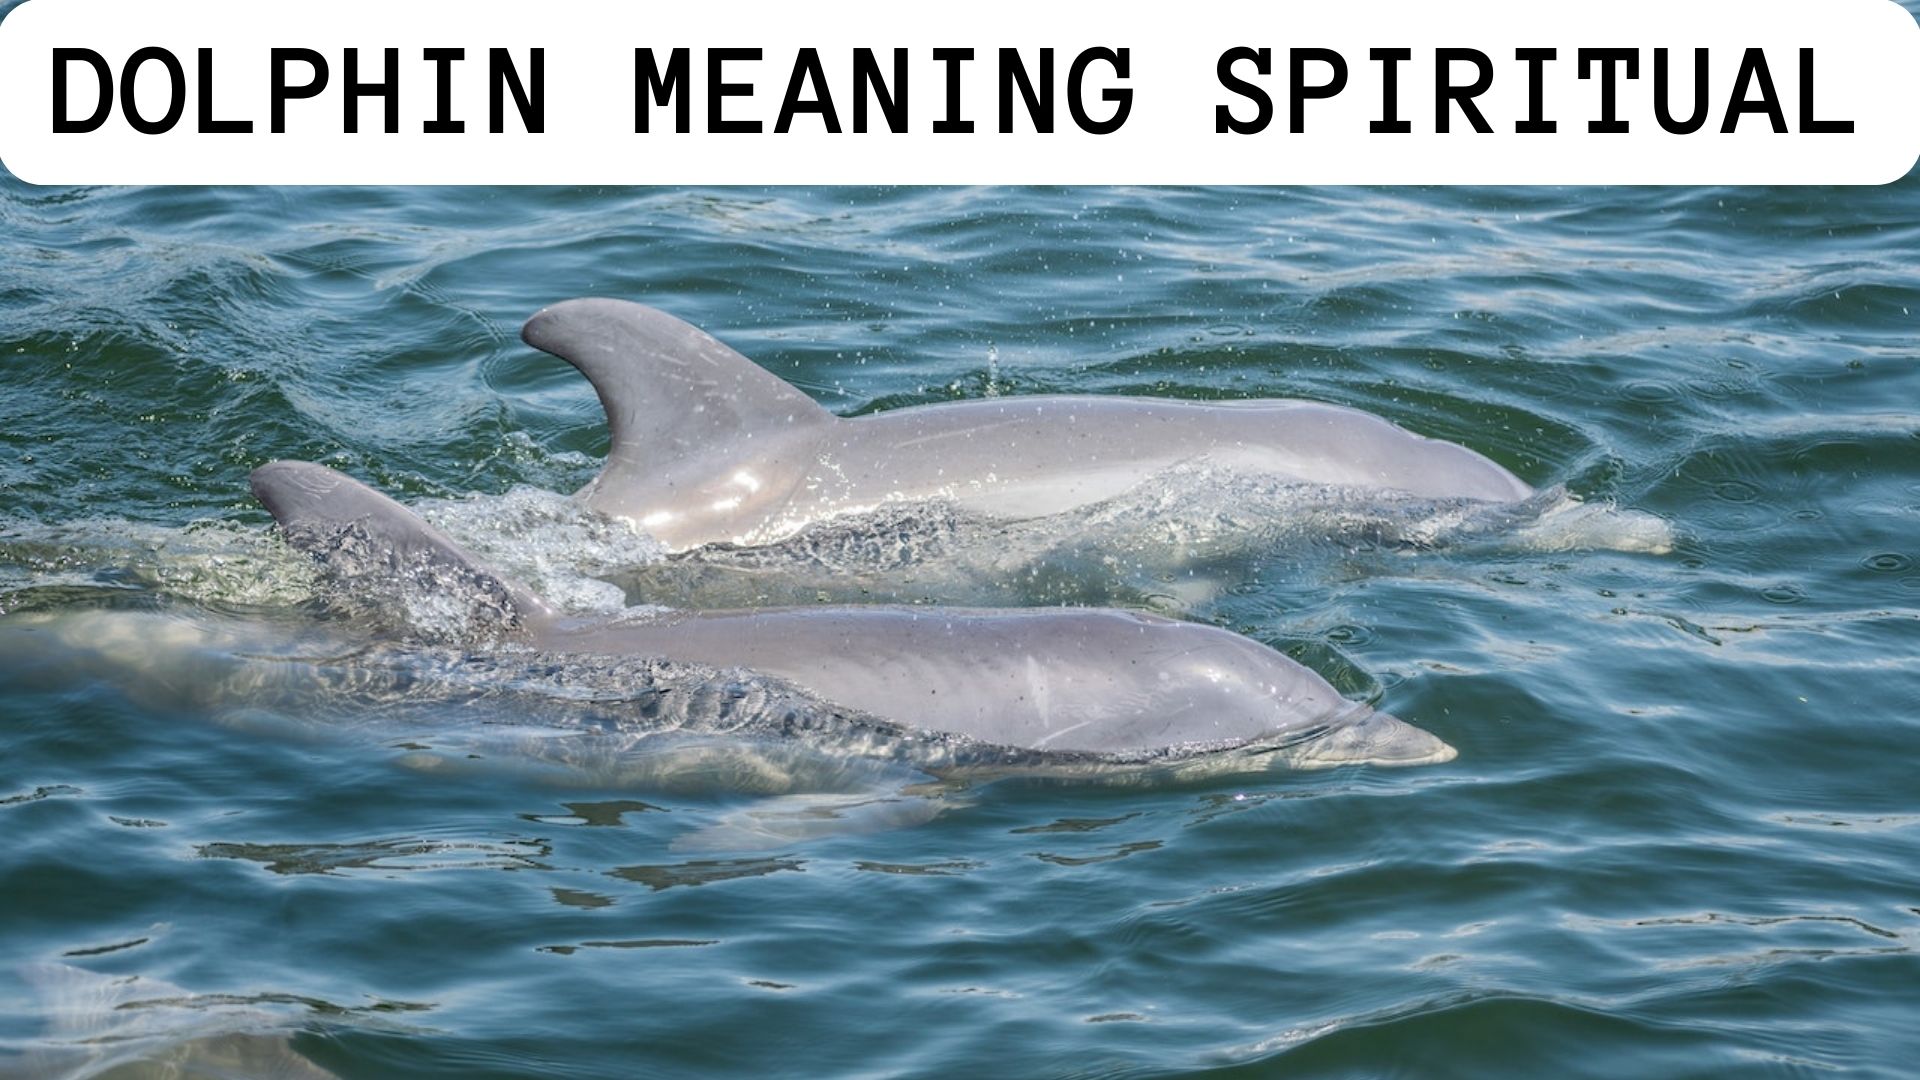 Dolphin Meaning Spiritual - Represents Harmony And Balance